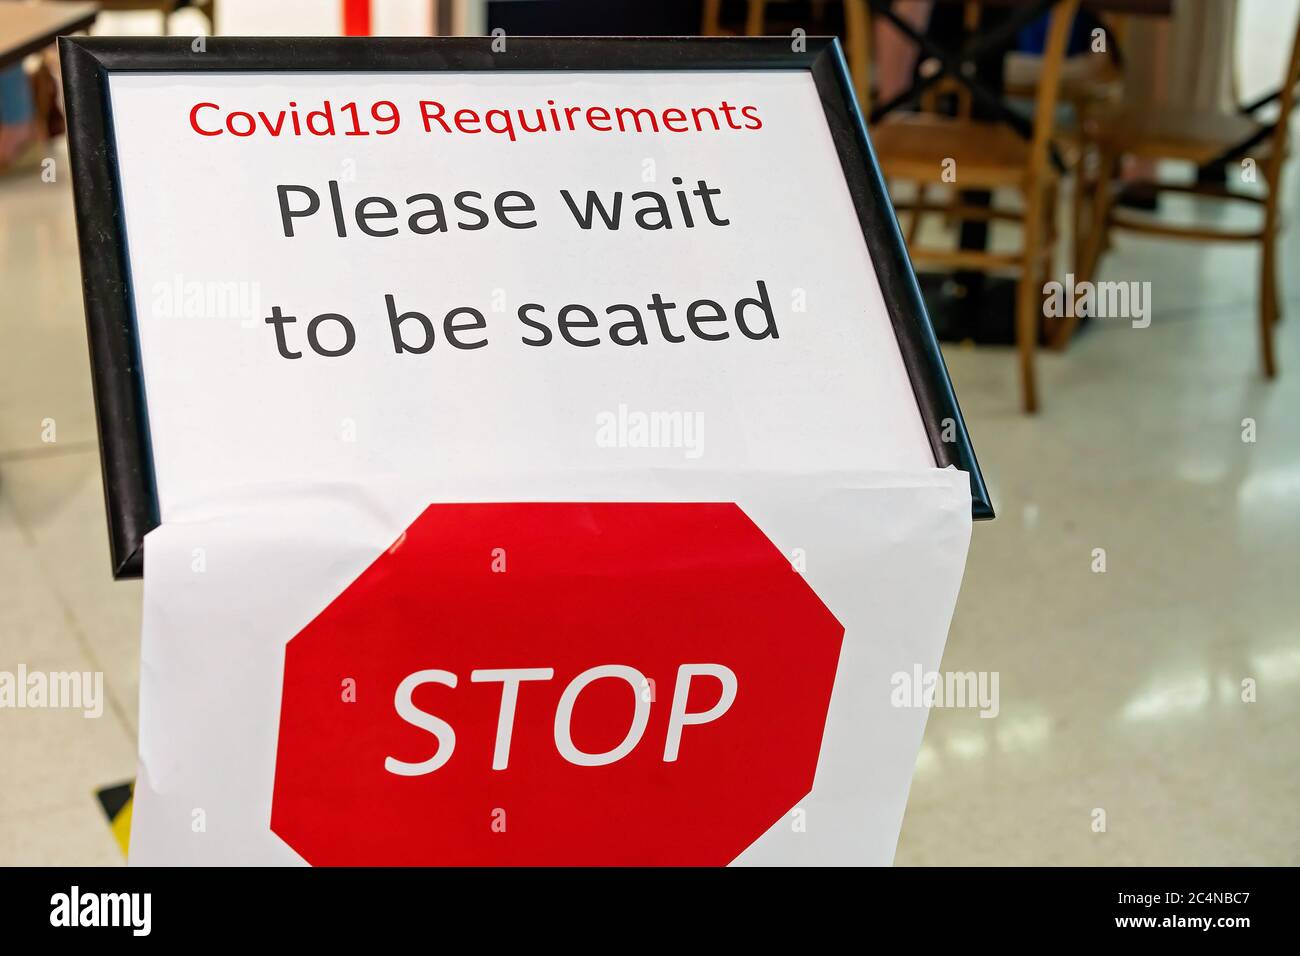 Townsville, Queensland, Australia - June 2020: Please wait to be seated sign at coffee shop during Covid-19 restrictions Stock Photo